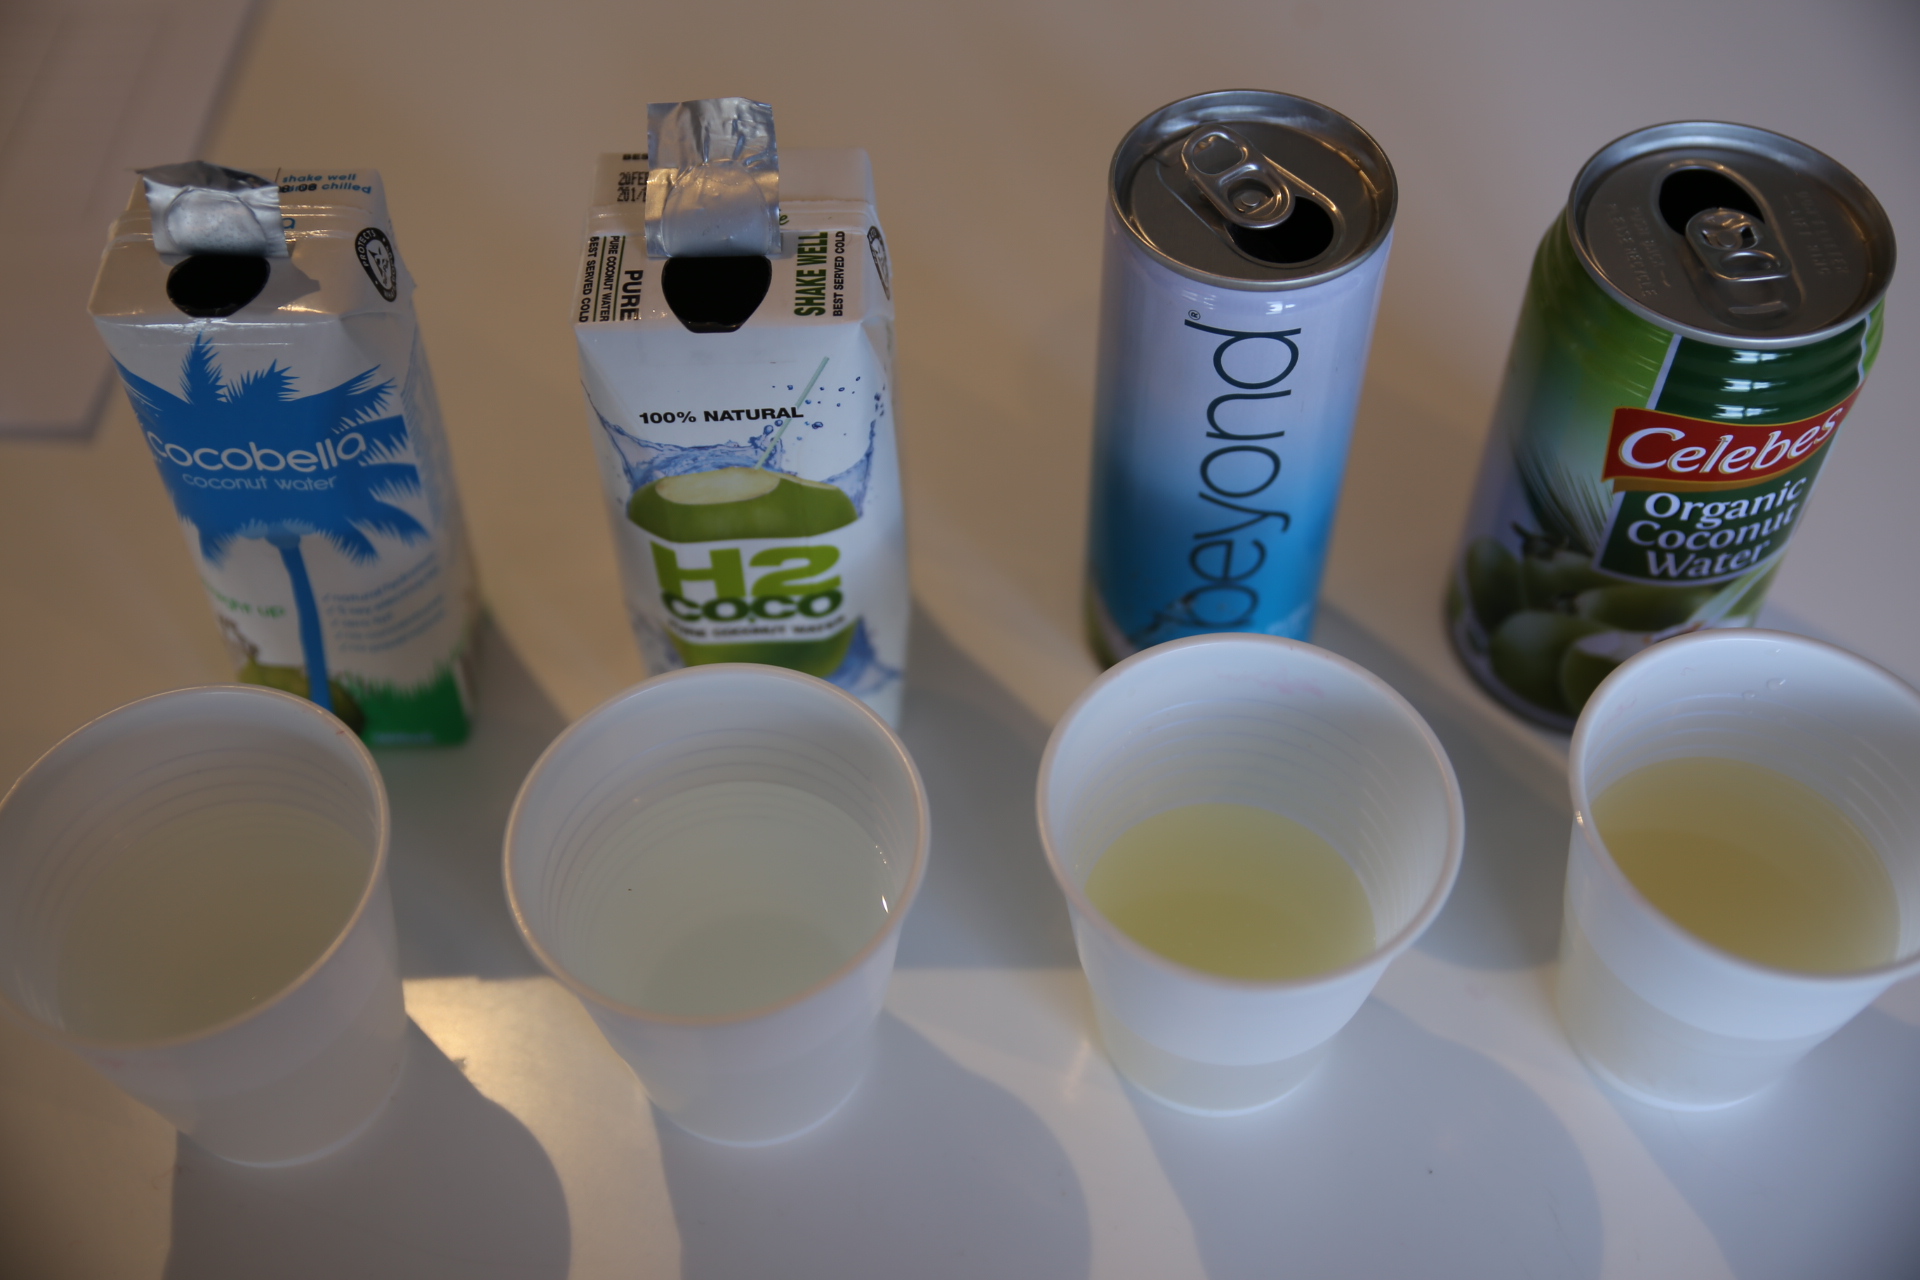 Coconut waters 4up glasses